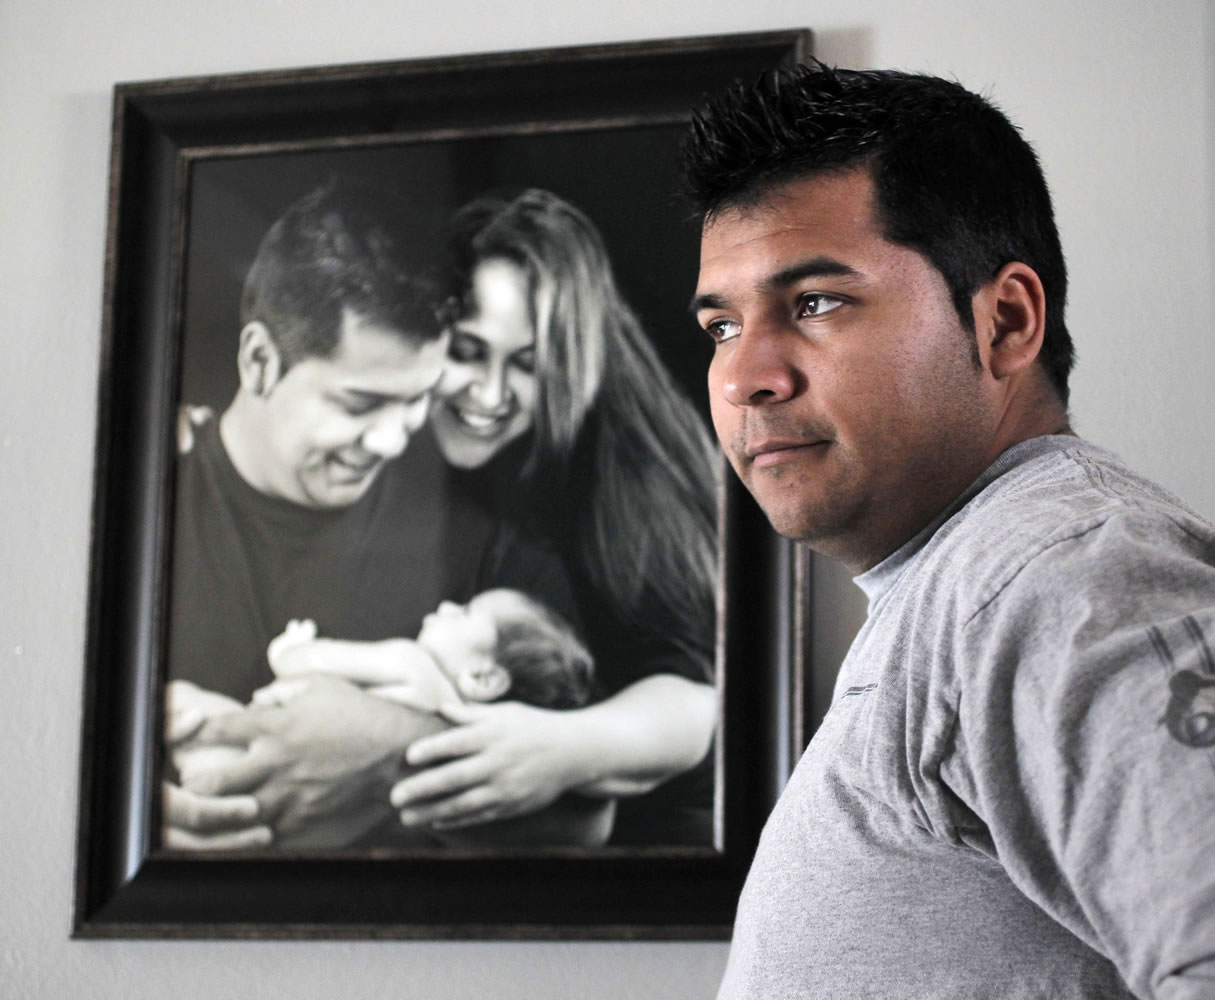 Associated Press files
Erick Munoz stands Jan. 3 next to a photograph of himself, left, with wife Marlise and their son, Mateo, in Haltom City, Texas. Marlise was removed from life support Sunday.